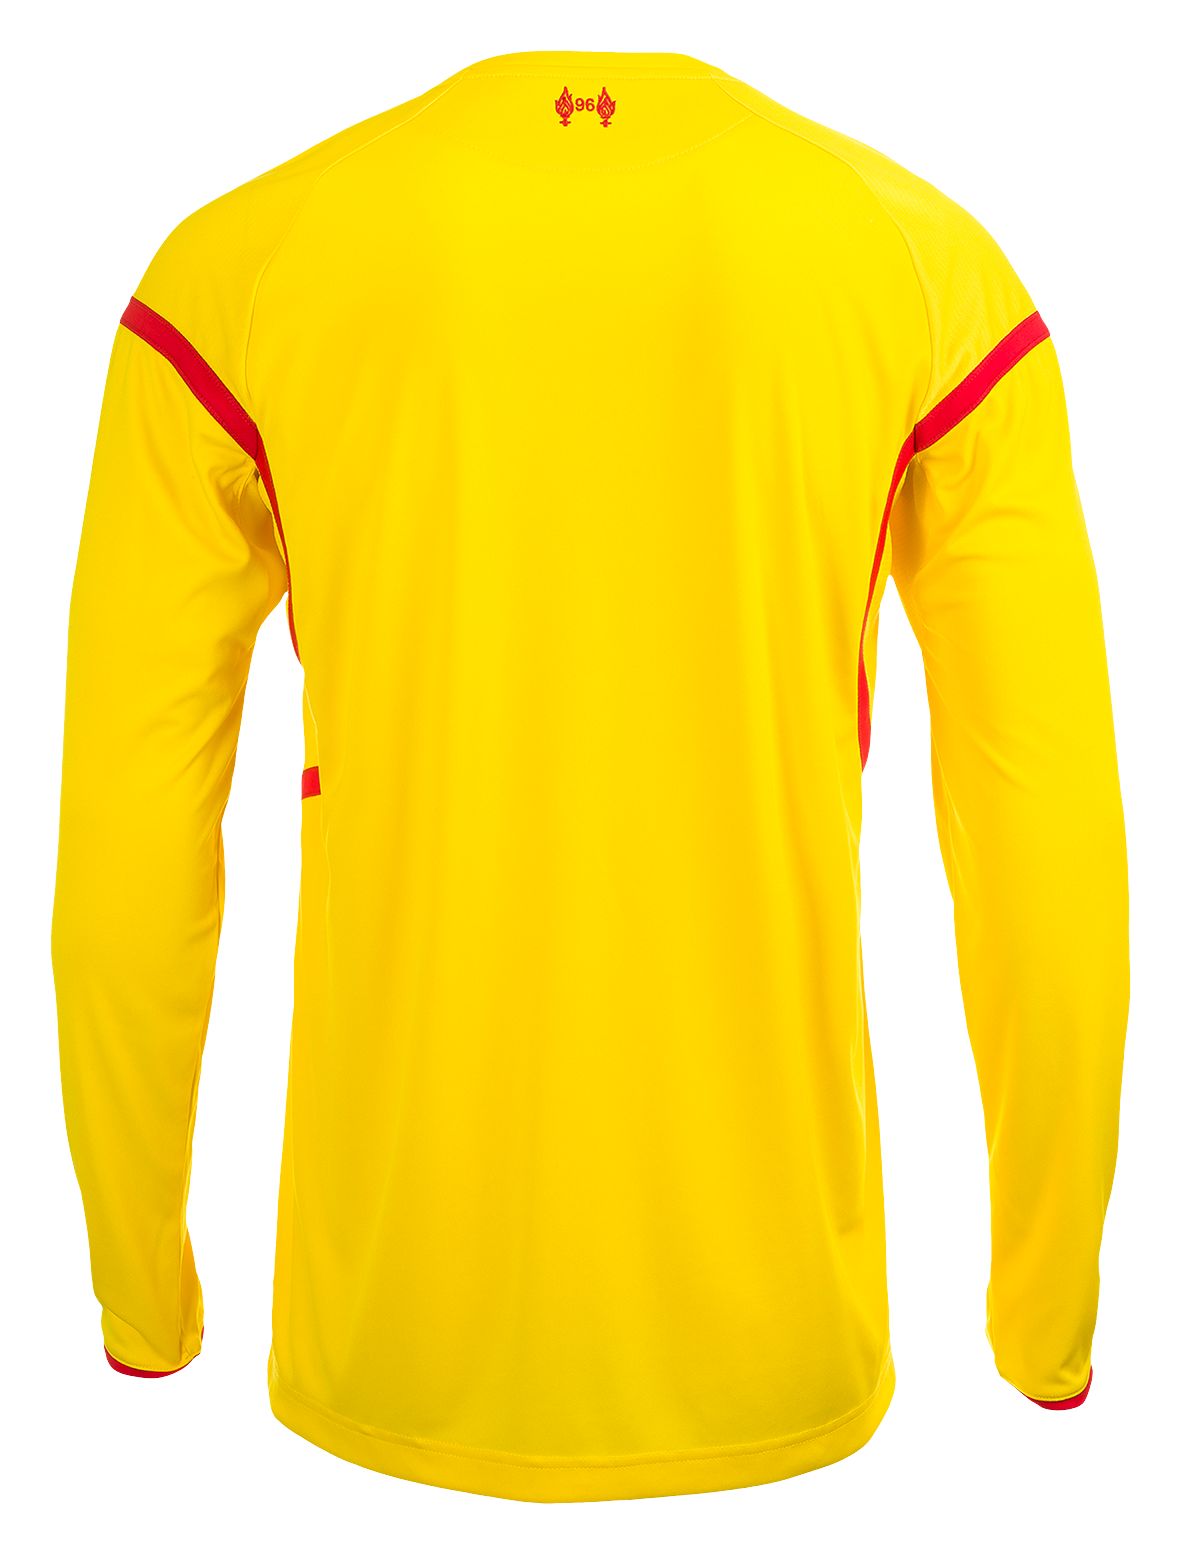 Liverpool Away Long Sleeve Jersey 2014/15, Cyber Yellow with High Risk Red image number 2